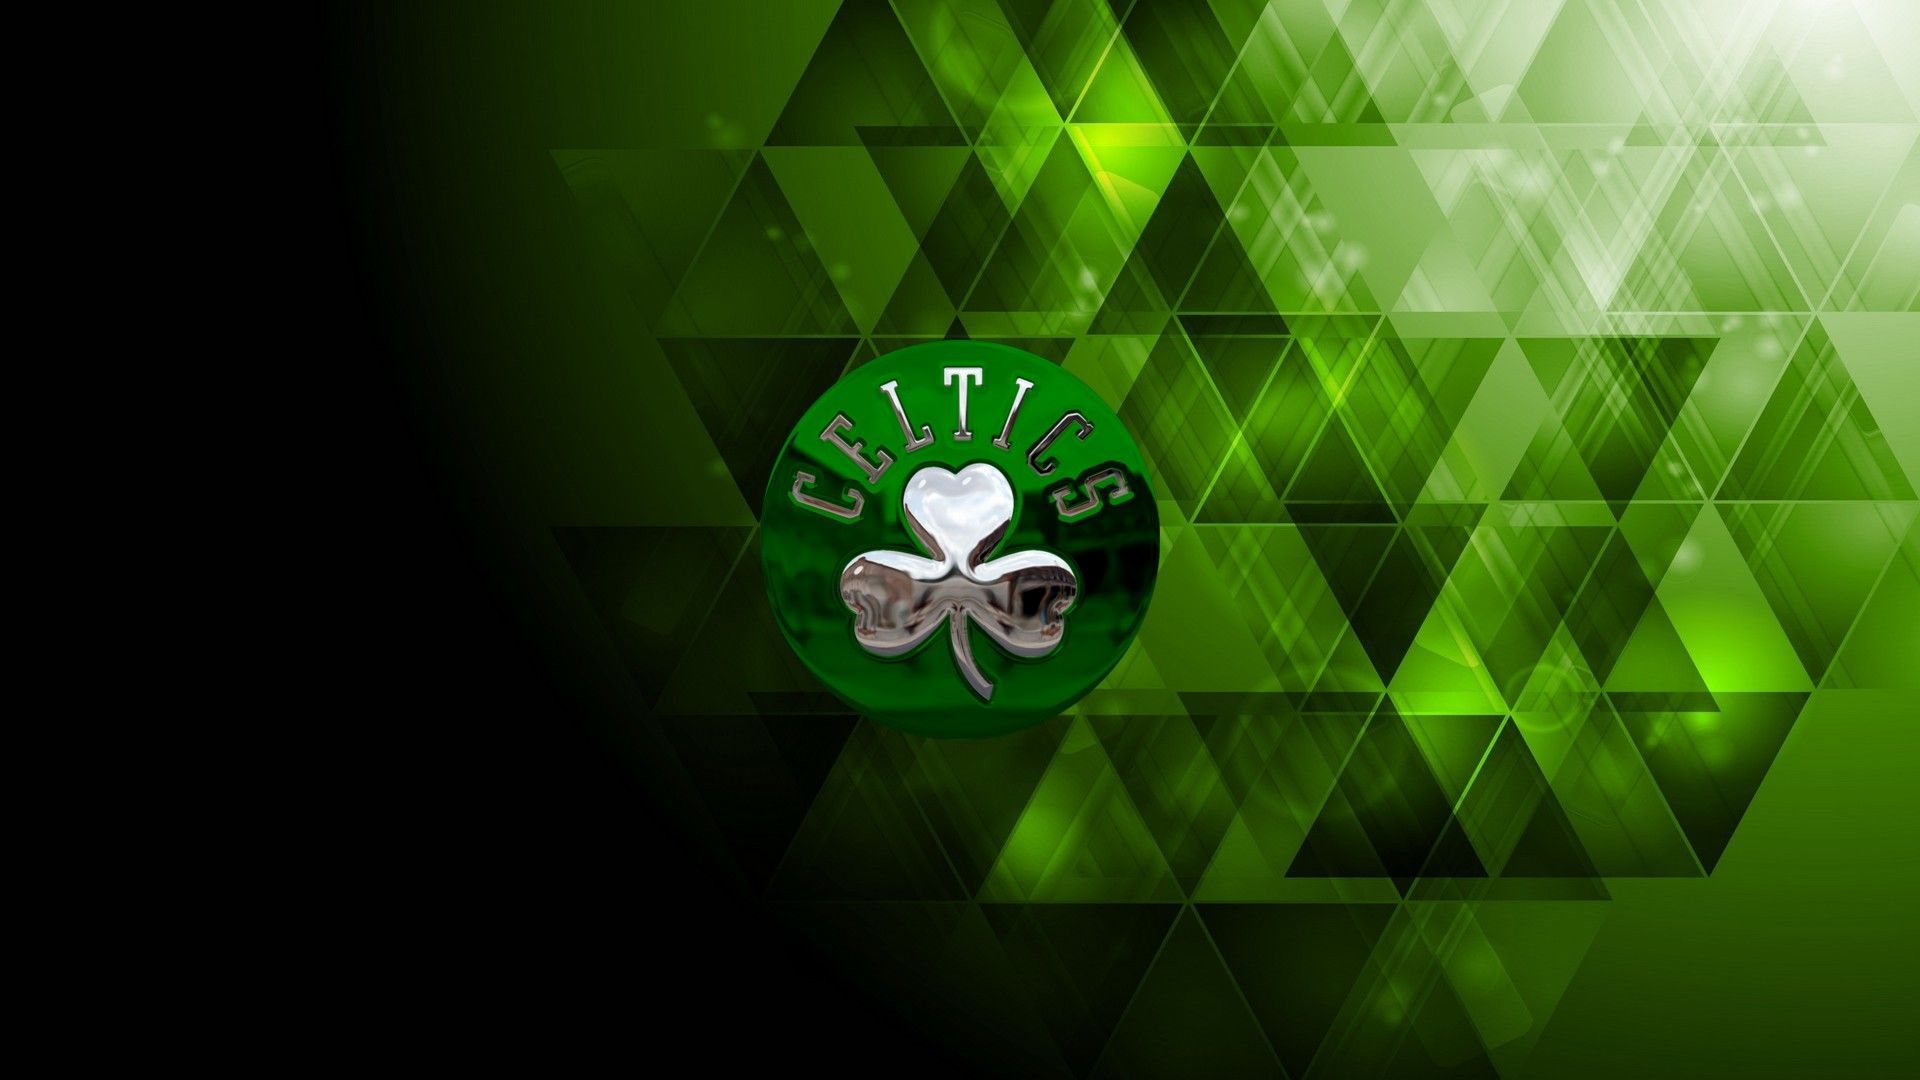 80+ Boston Celtics HD Wallpapers and Backgrounds